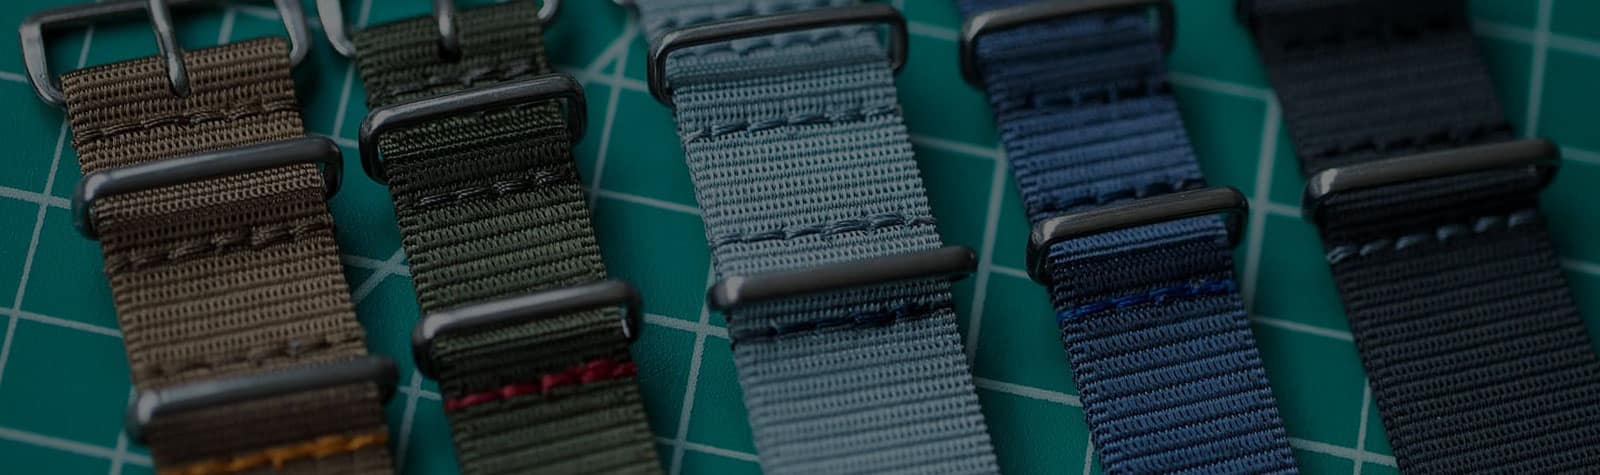 STRAP SWAP: Introducing ADPT Strap, the American-made Nylon Watch Strap from Worn & Wound